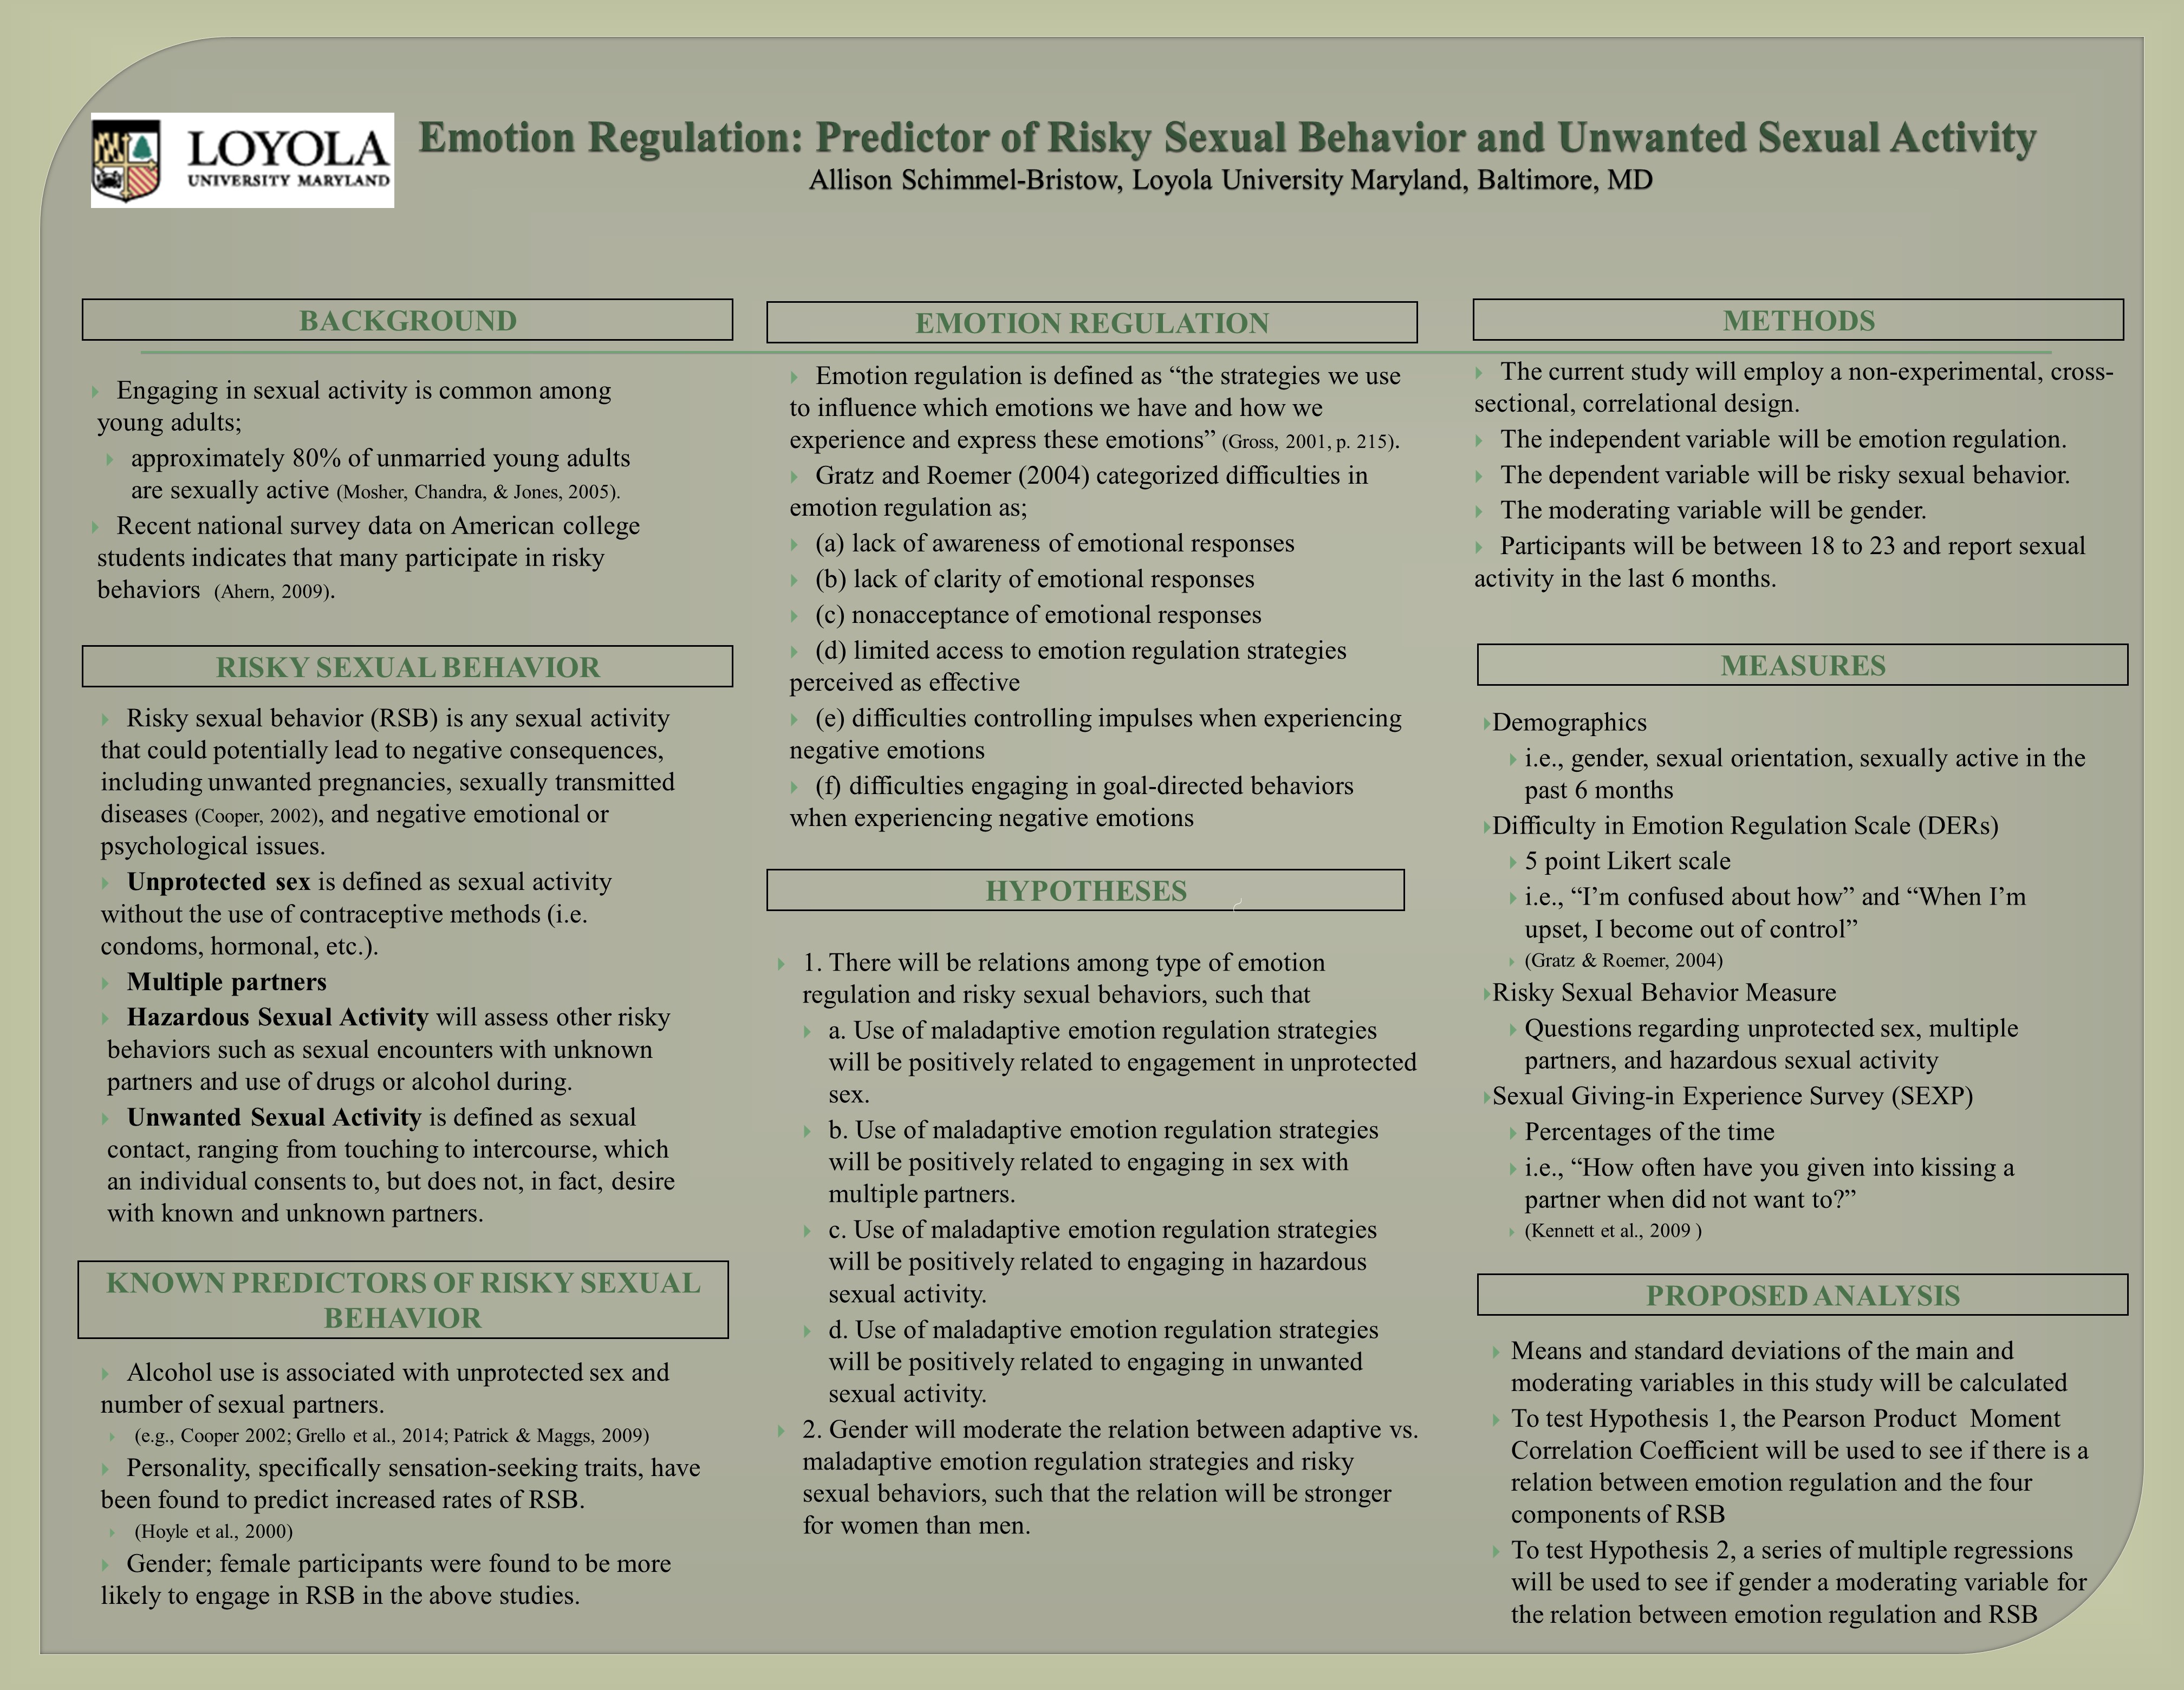 poster image: Emotion Regulation: Predictor of Risky Sexual Behavior and Unwanted Sexual Activity